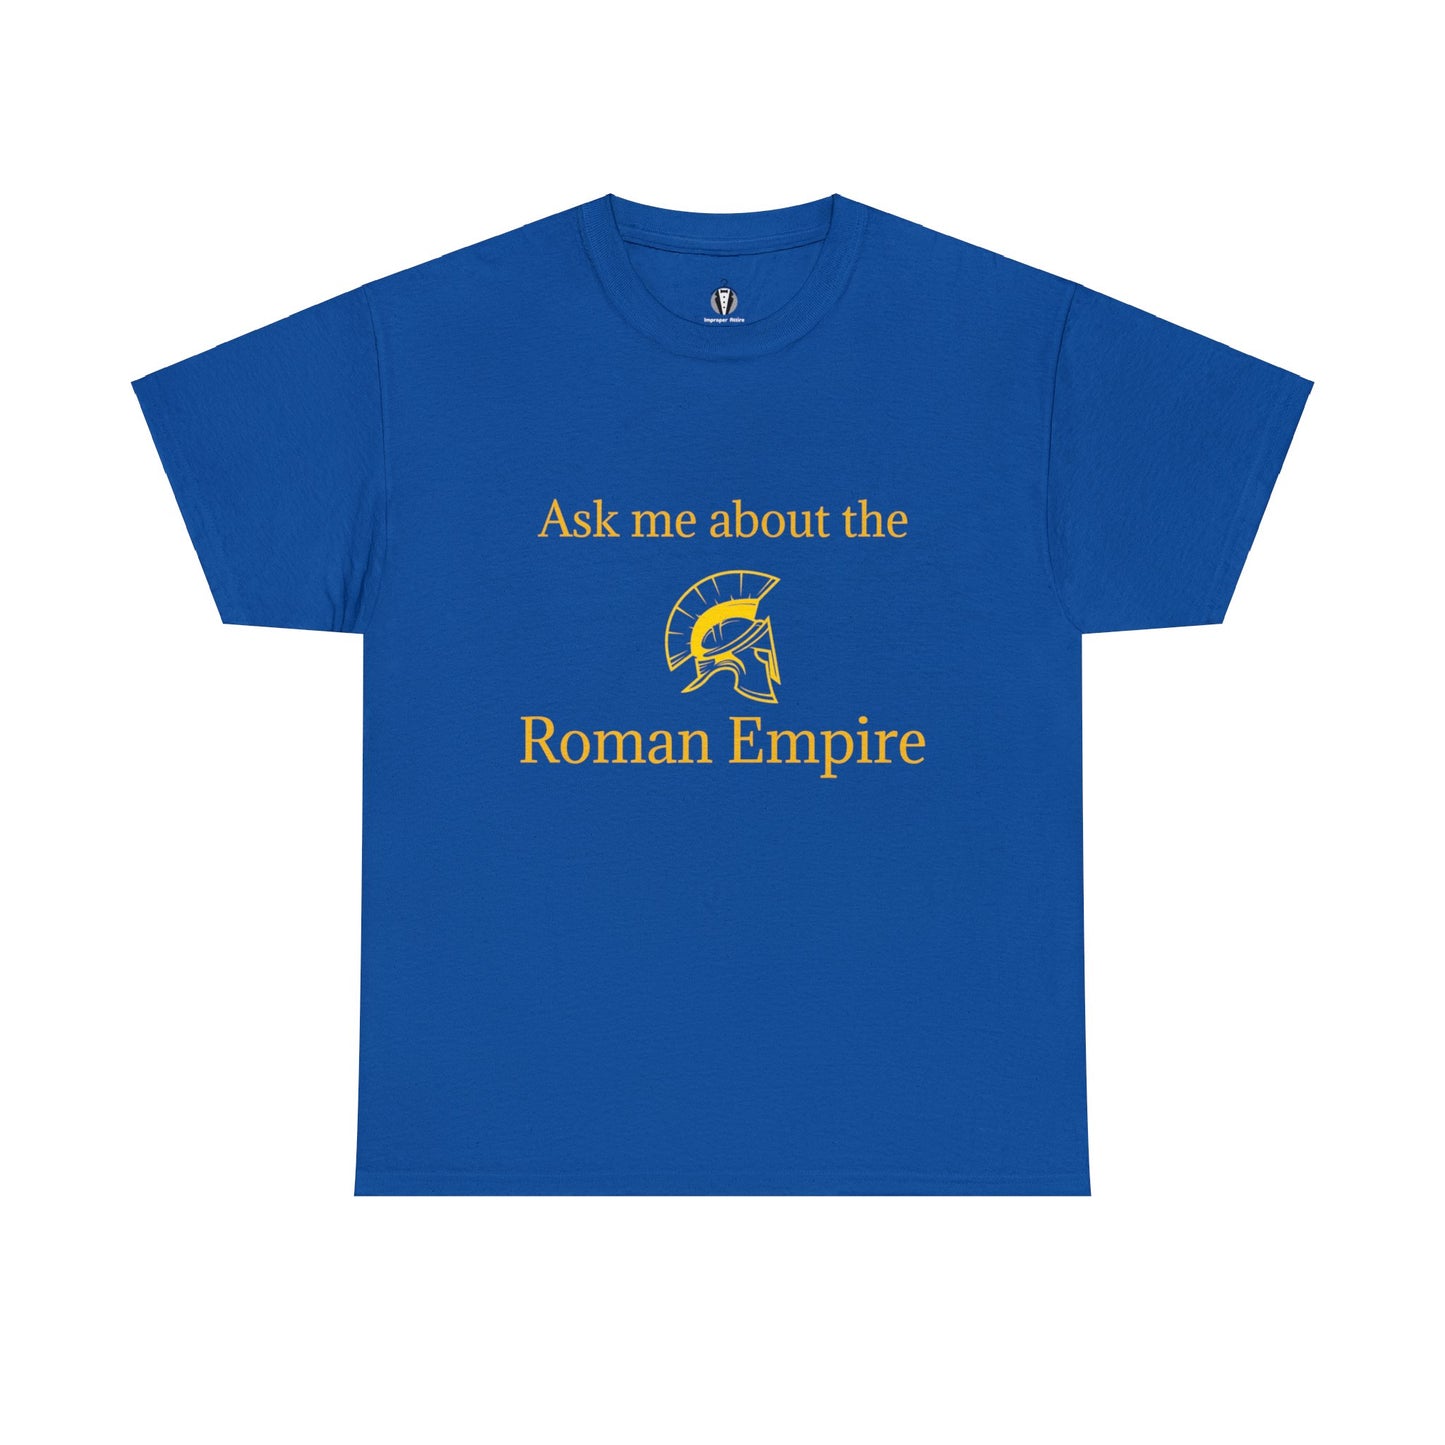 "Ask me about the Roman Empire" - Tee